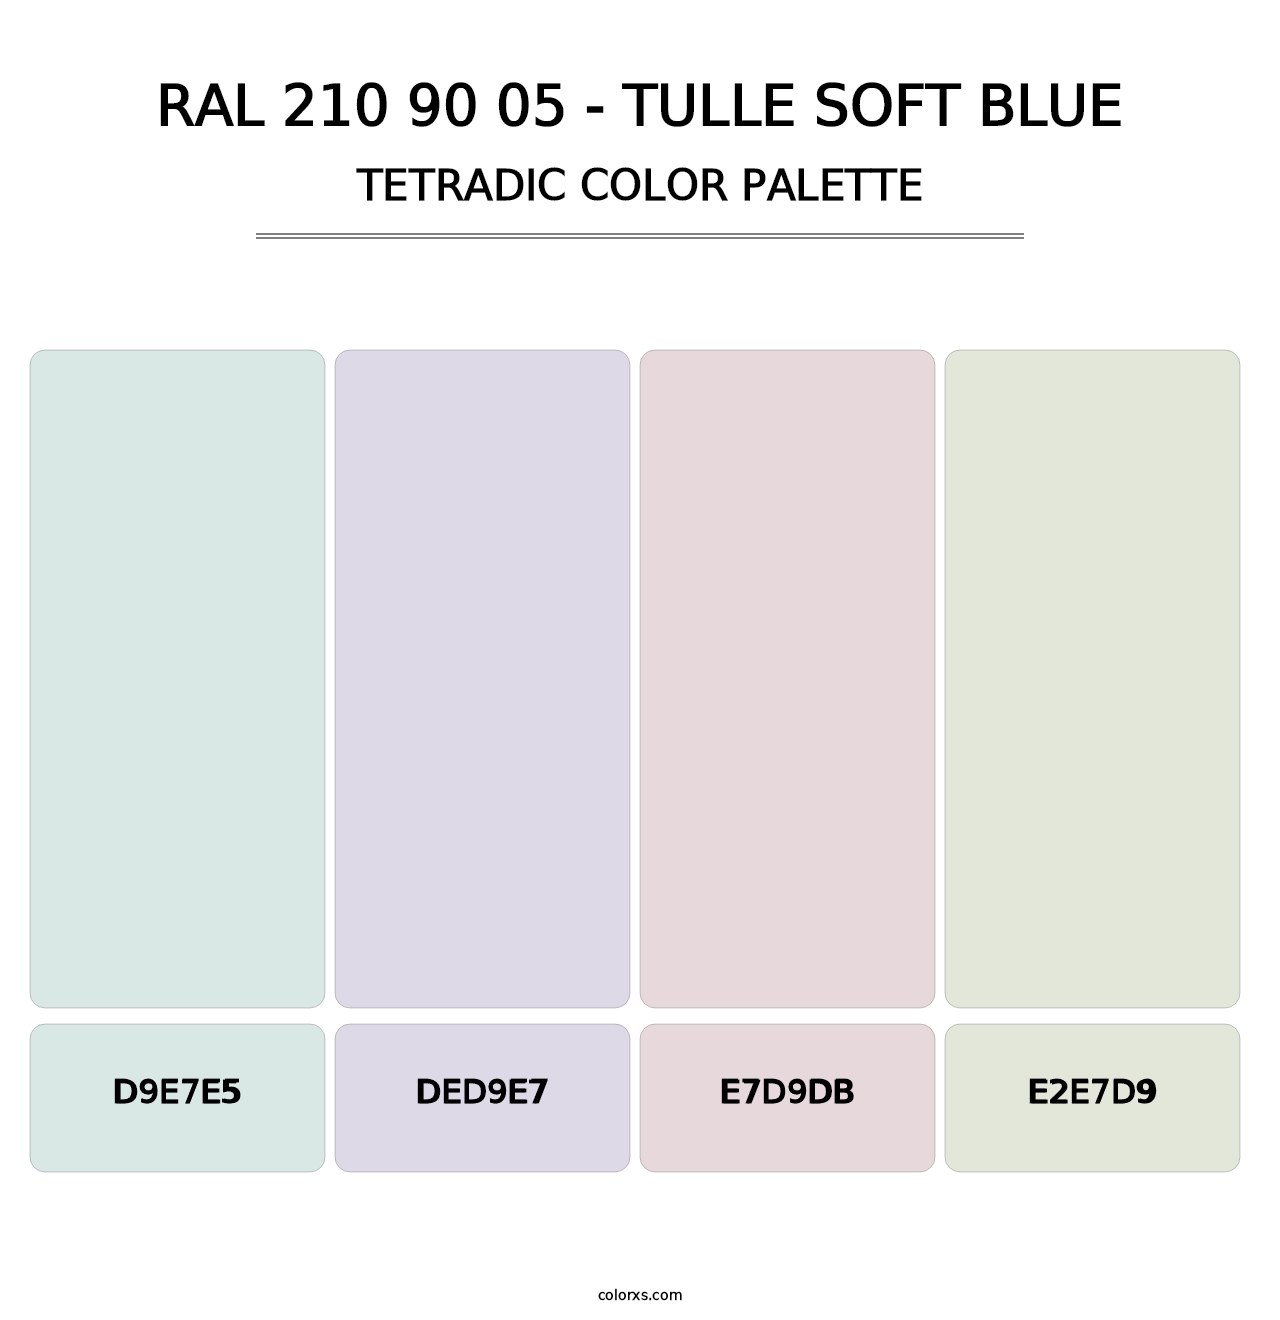 RAL 210 90 05 - Tulle Soft Blue - Tetradic Color Palette